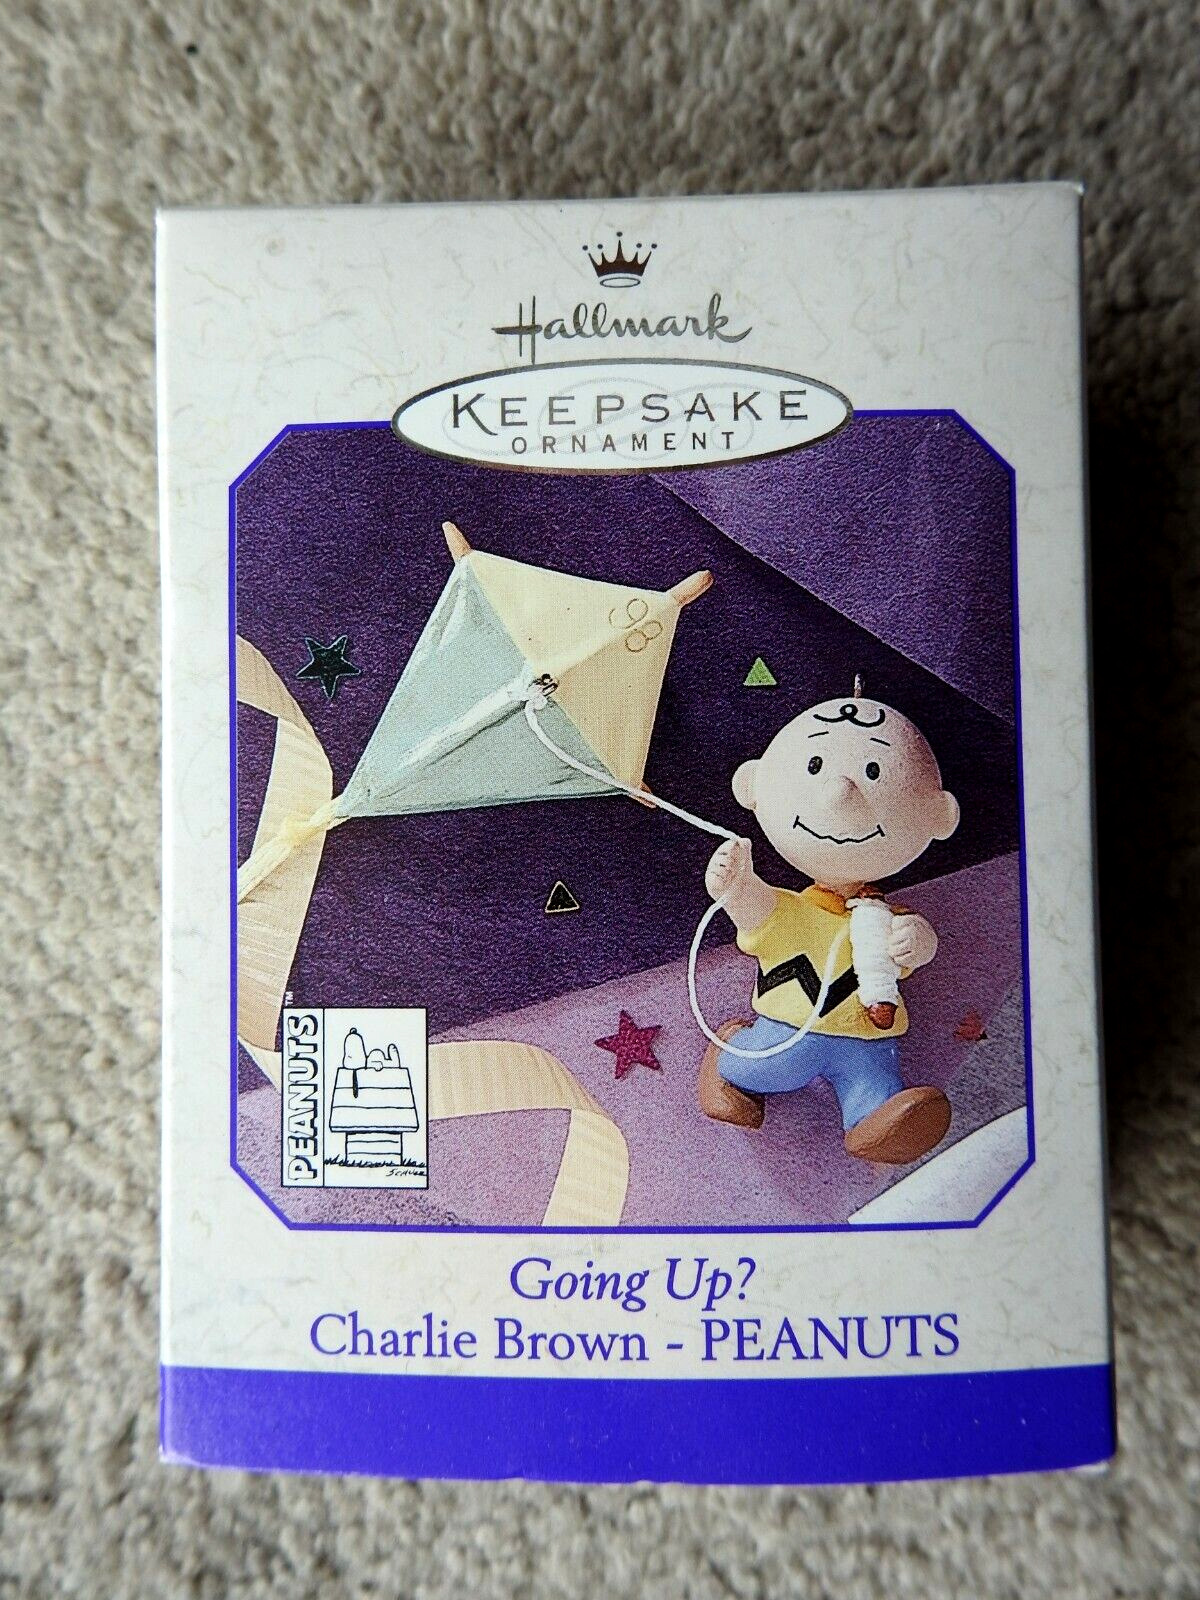 Hallmark Ornament 1998 Going Up? Charlie Brown PEANUTS